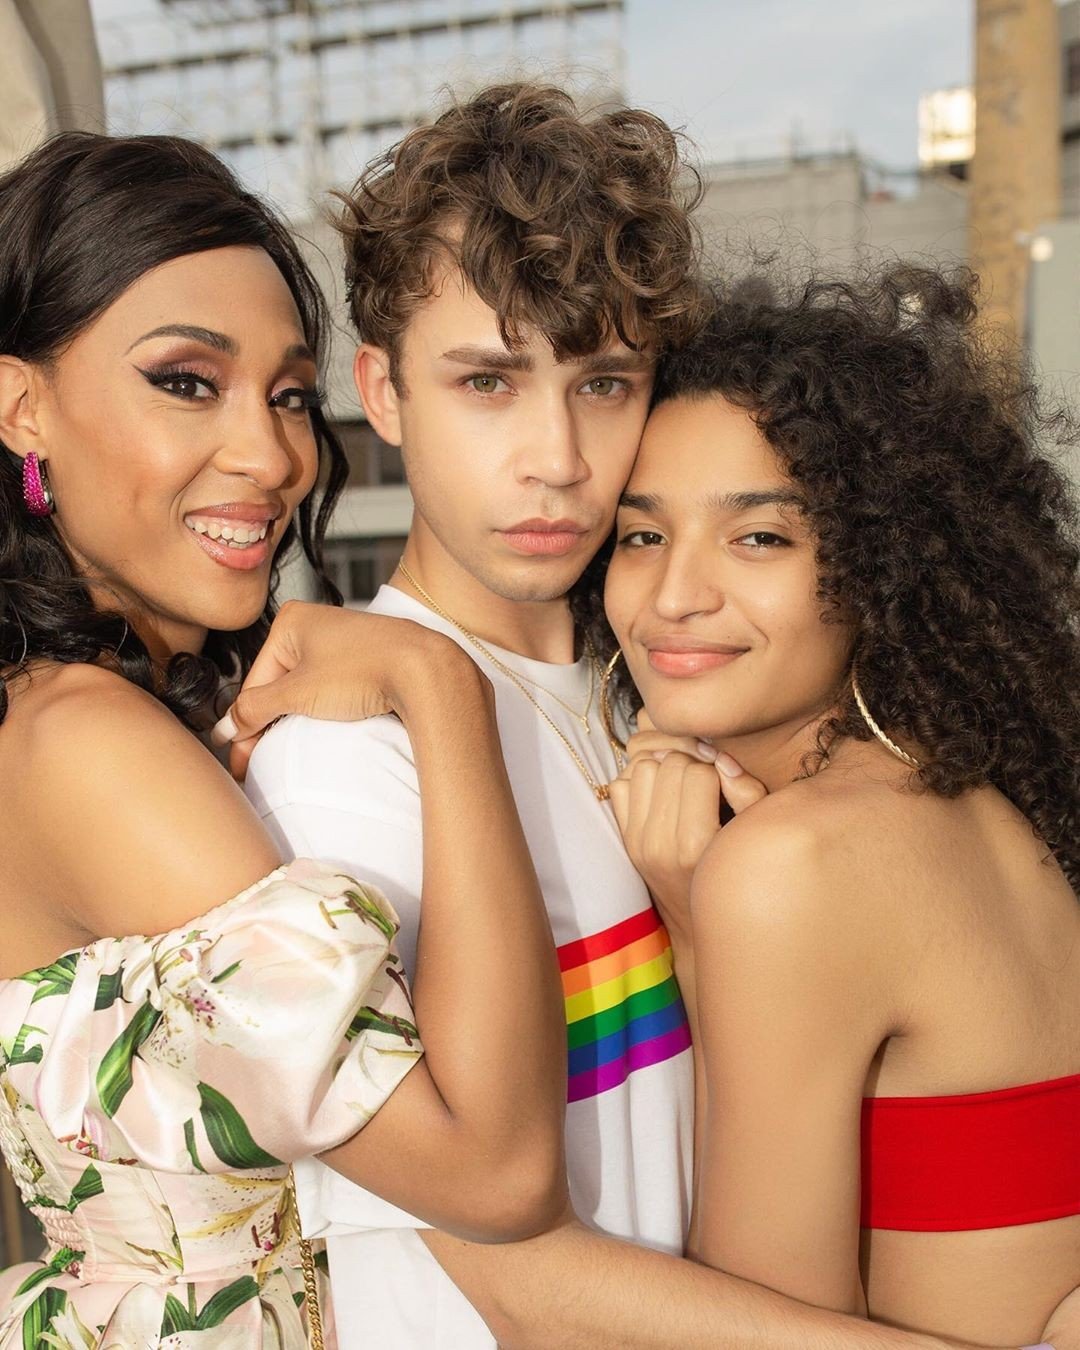 From left, Mj Rodriguez, Jeremy McClain and Indya Moore. Moore ﻿is an outspoken trans model, activist and actor. Photo: IG @indyamoore